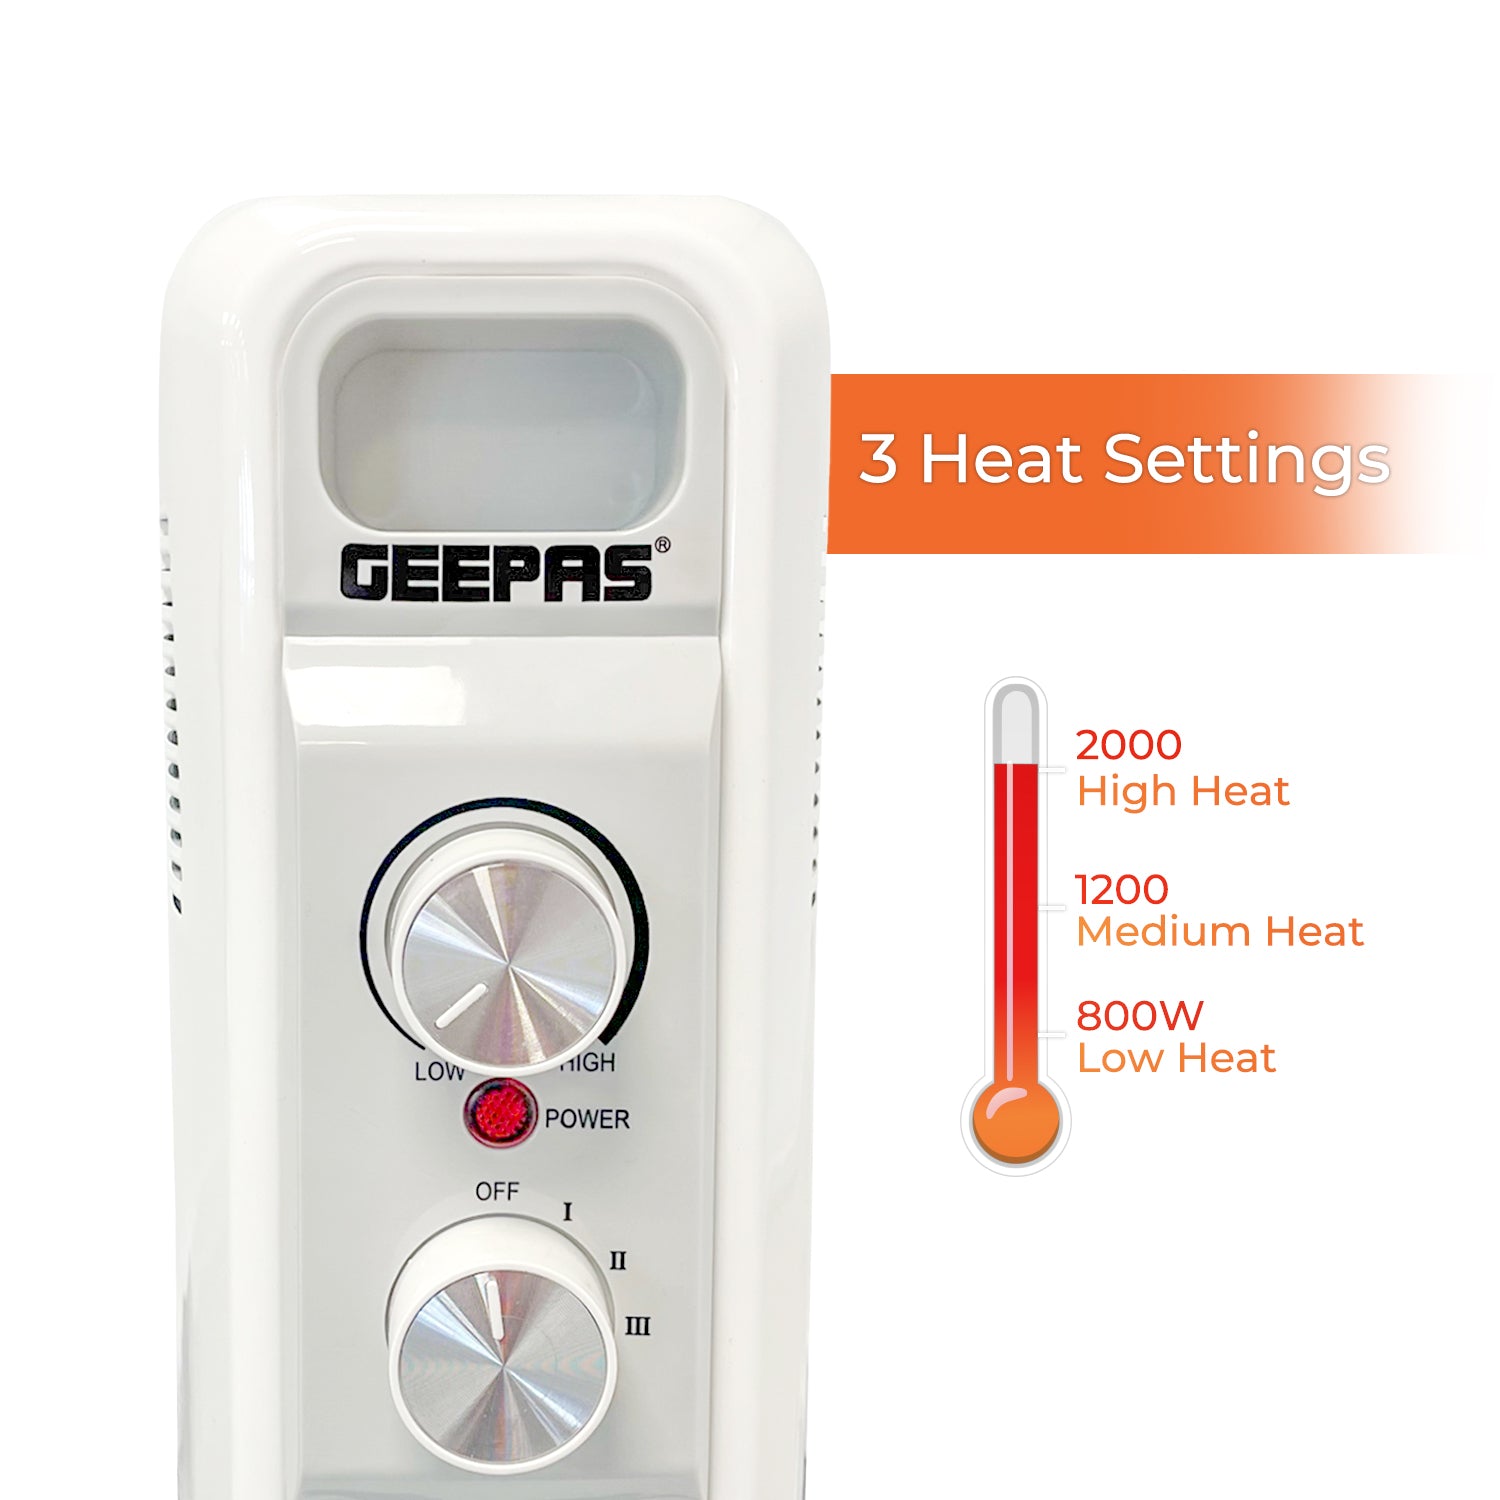 Geepas | For you. For life. Oil Filled Radiator Heater, 2000W Heaters